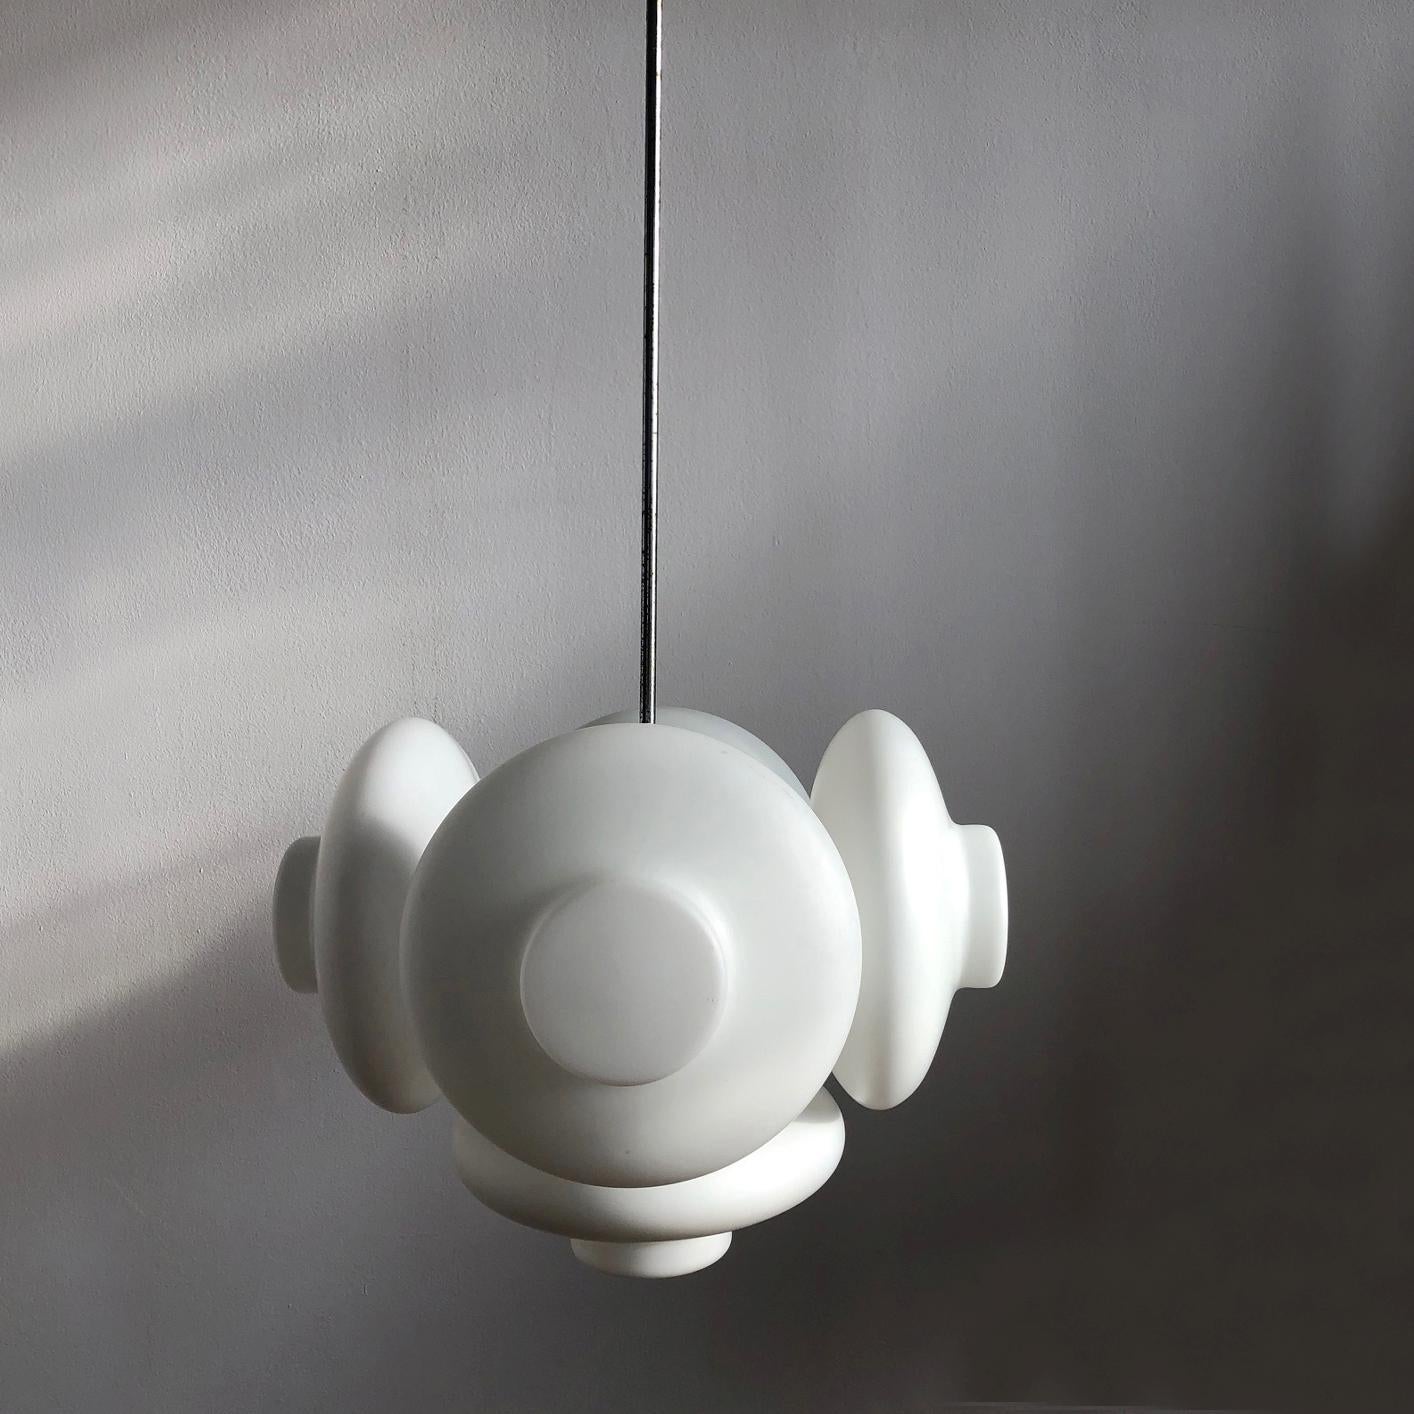 Unusual hanging lamp signed Napako. Five lampshades are made of milk glass and gives warm diffused light. The lamp is rewired. The length of the rod can be customized. 